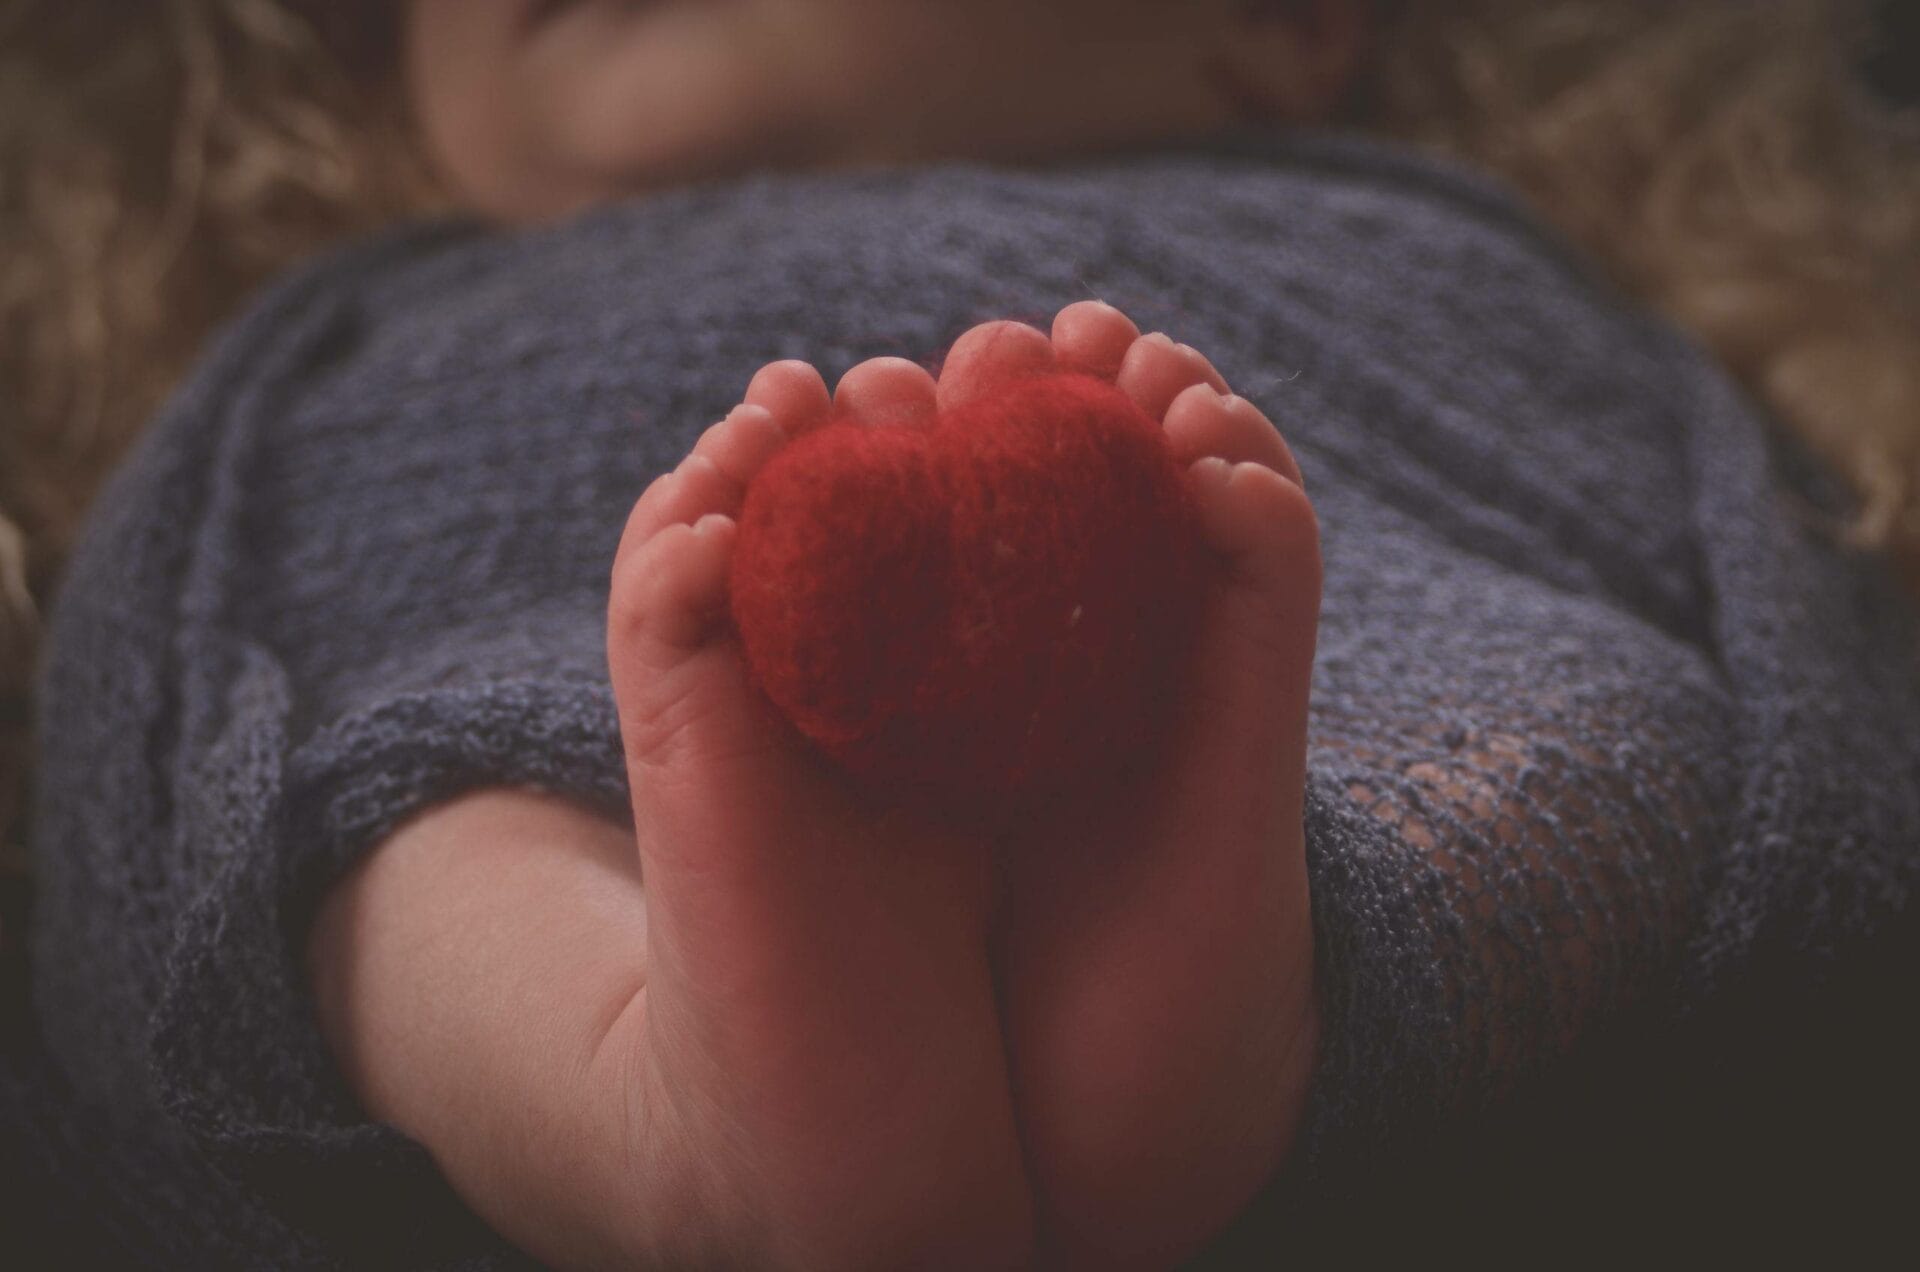 A baby's feet are wrapped in a blanket with a red heart.